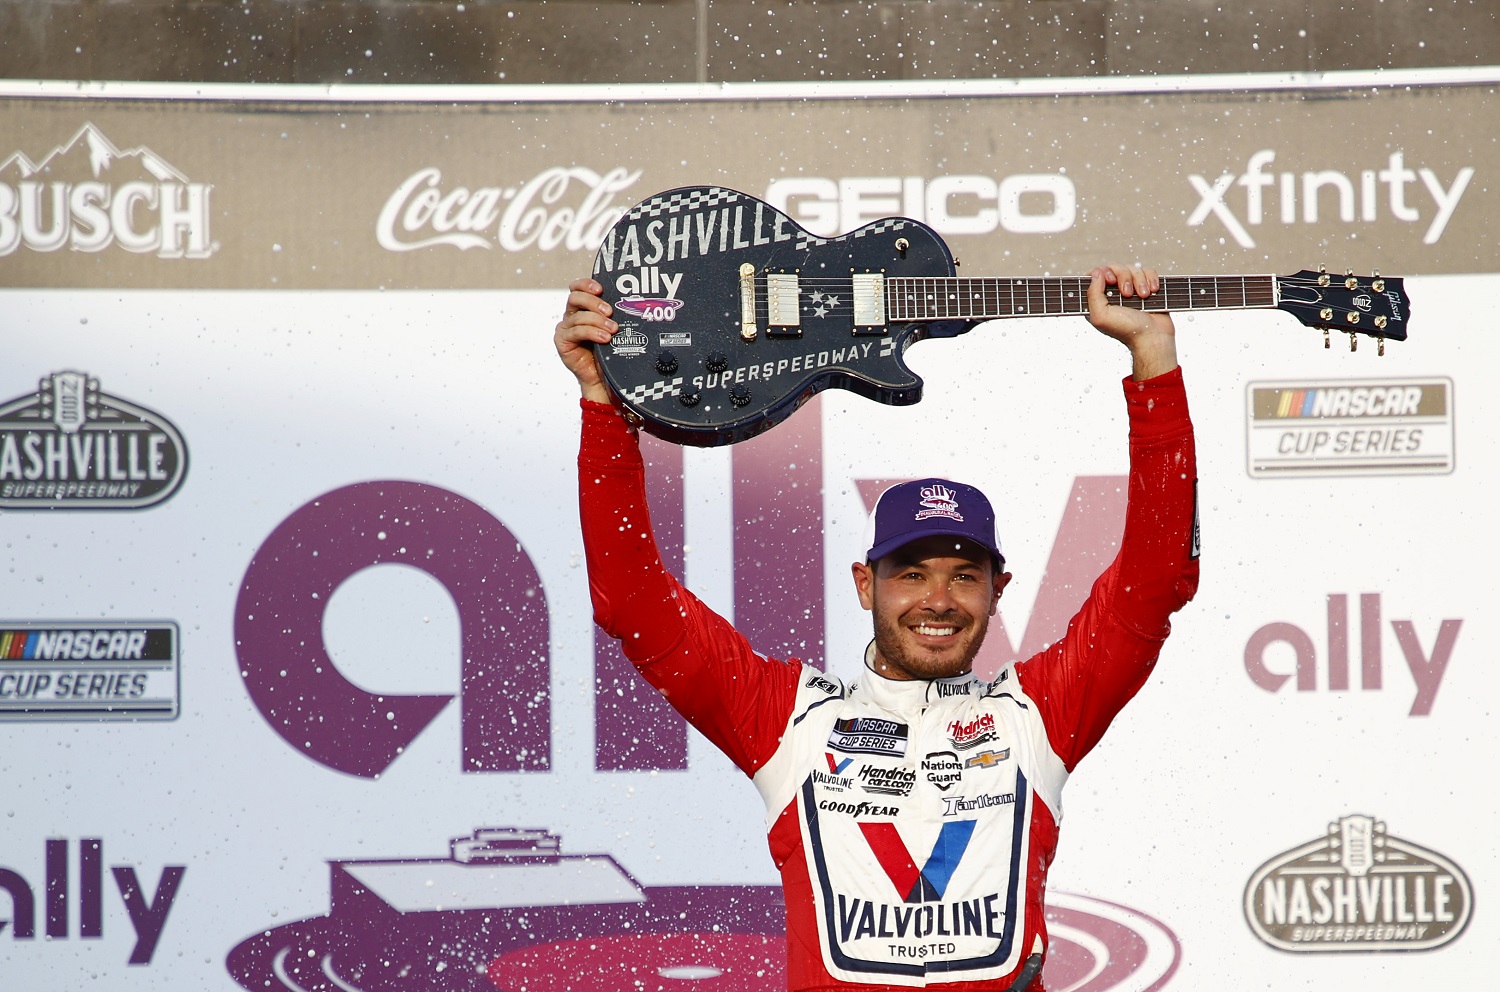 Kyle Larson celebrates in victory lane after winning the NASCAR Cup Series Ally 400 at Nashville Superspeedway on June 20, 2021 in Lebanon, Tennessee.